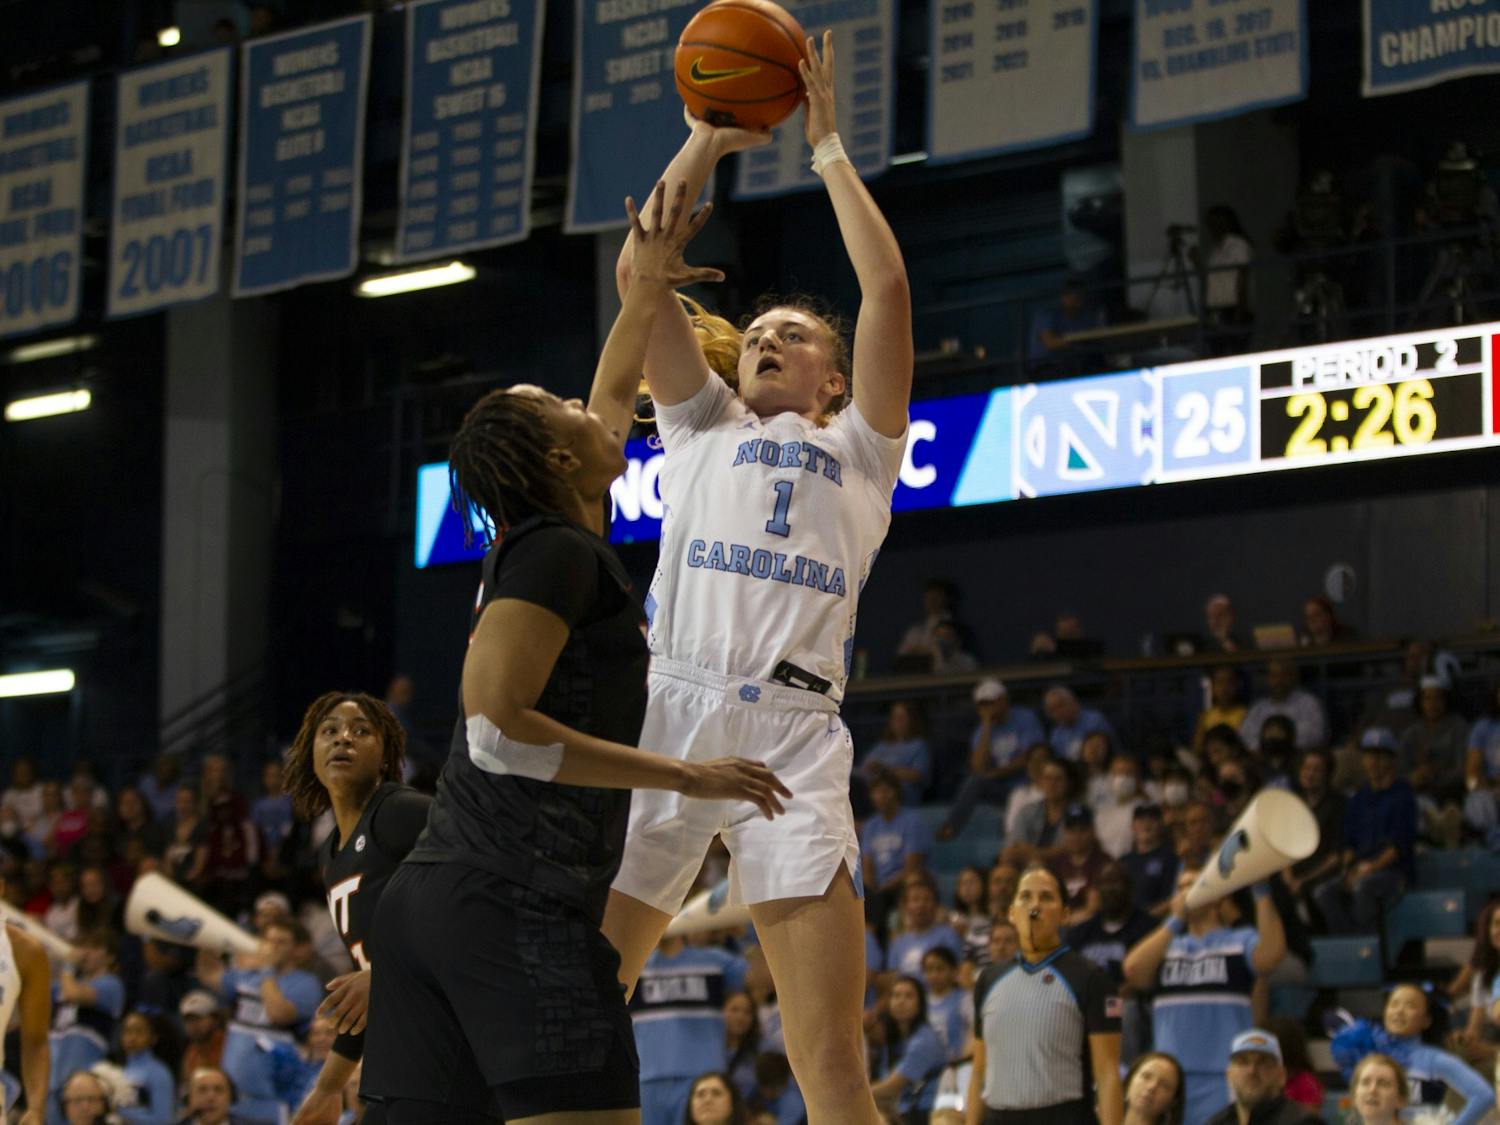 Junior forward/guard Alyssa Ustby (1) takes a jump shot during the women's basketball game against Virginia Tech on Thursday, Feb. 23, 2023, at Carmichael Arena. VT beat UNC 61-59.